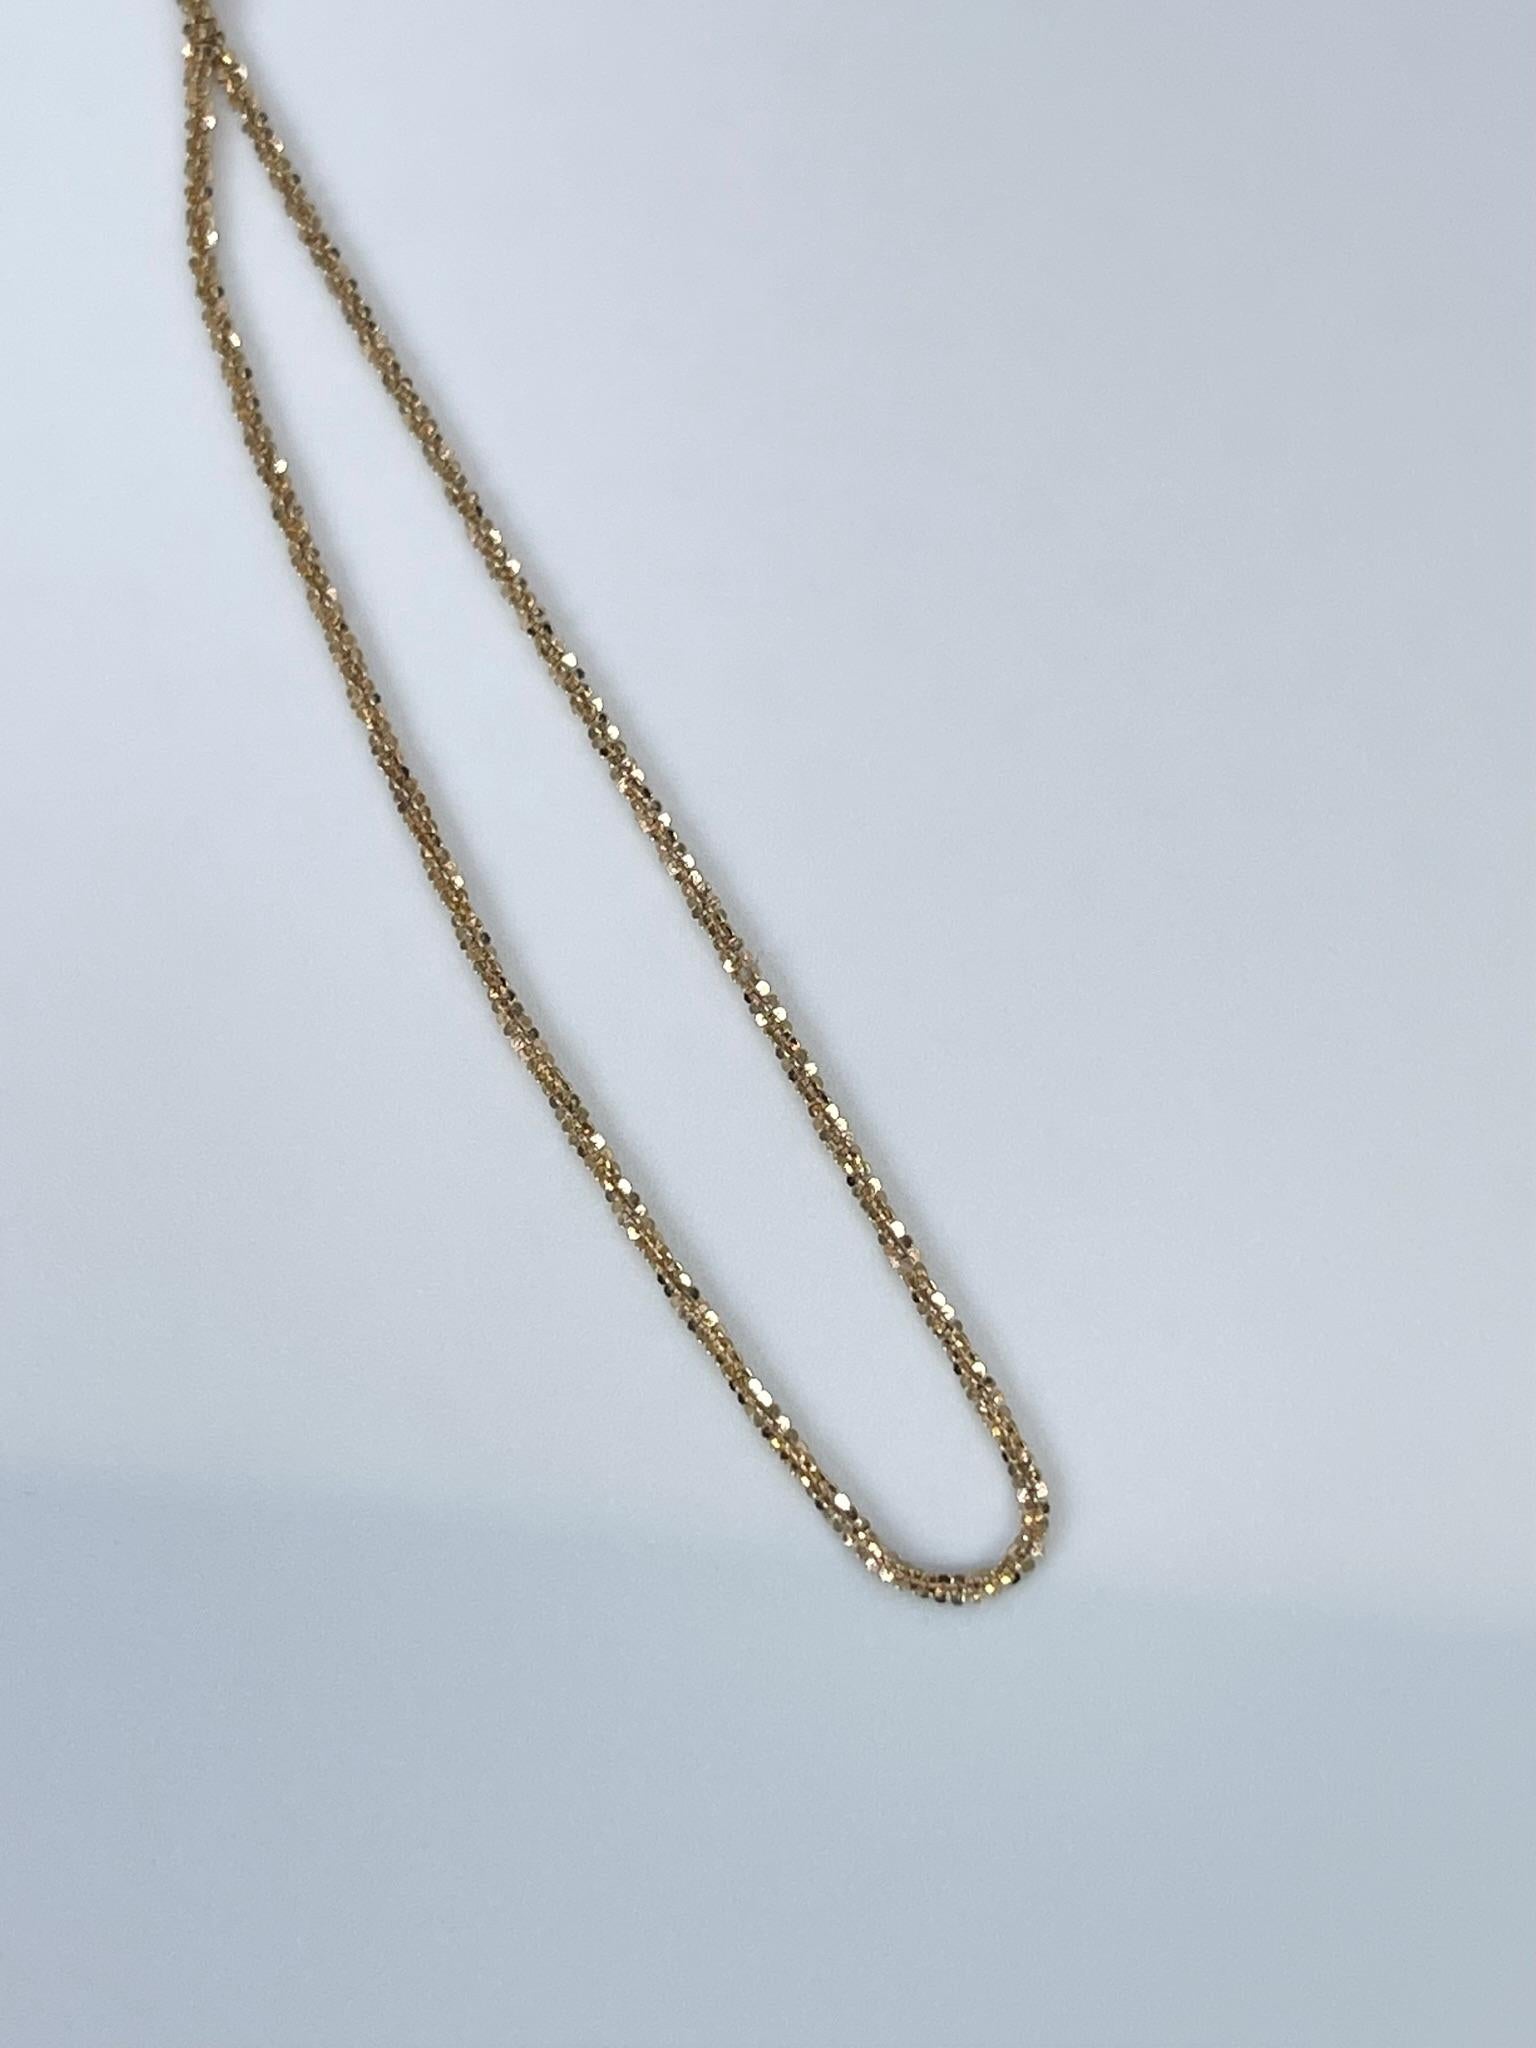 Modernist Fancy Gold Chain 10KT Yellow Gold Sparkling Diamond Chain Necklace Plain Solid For Sale